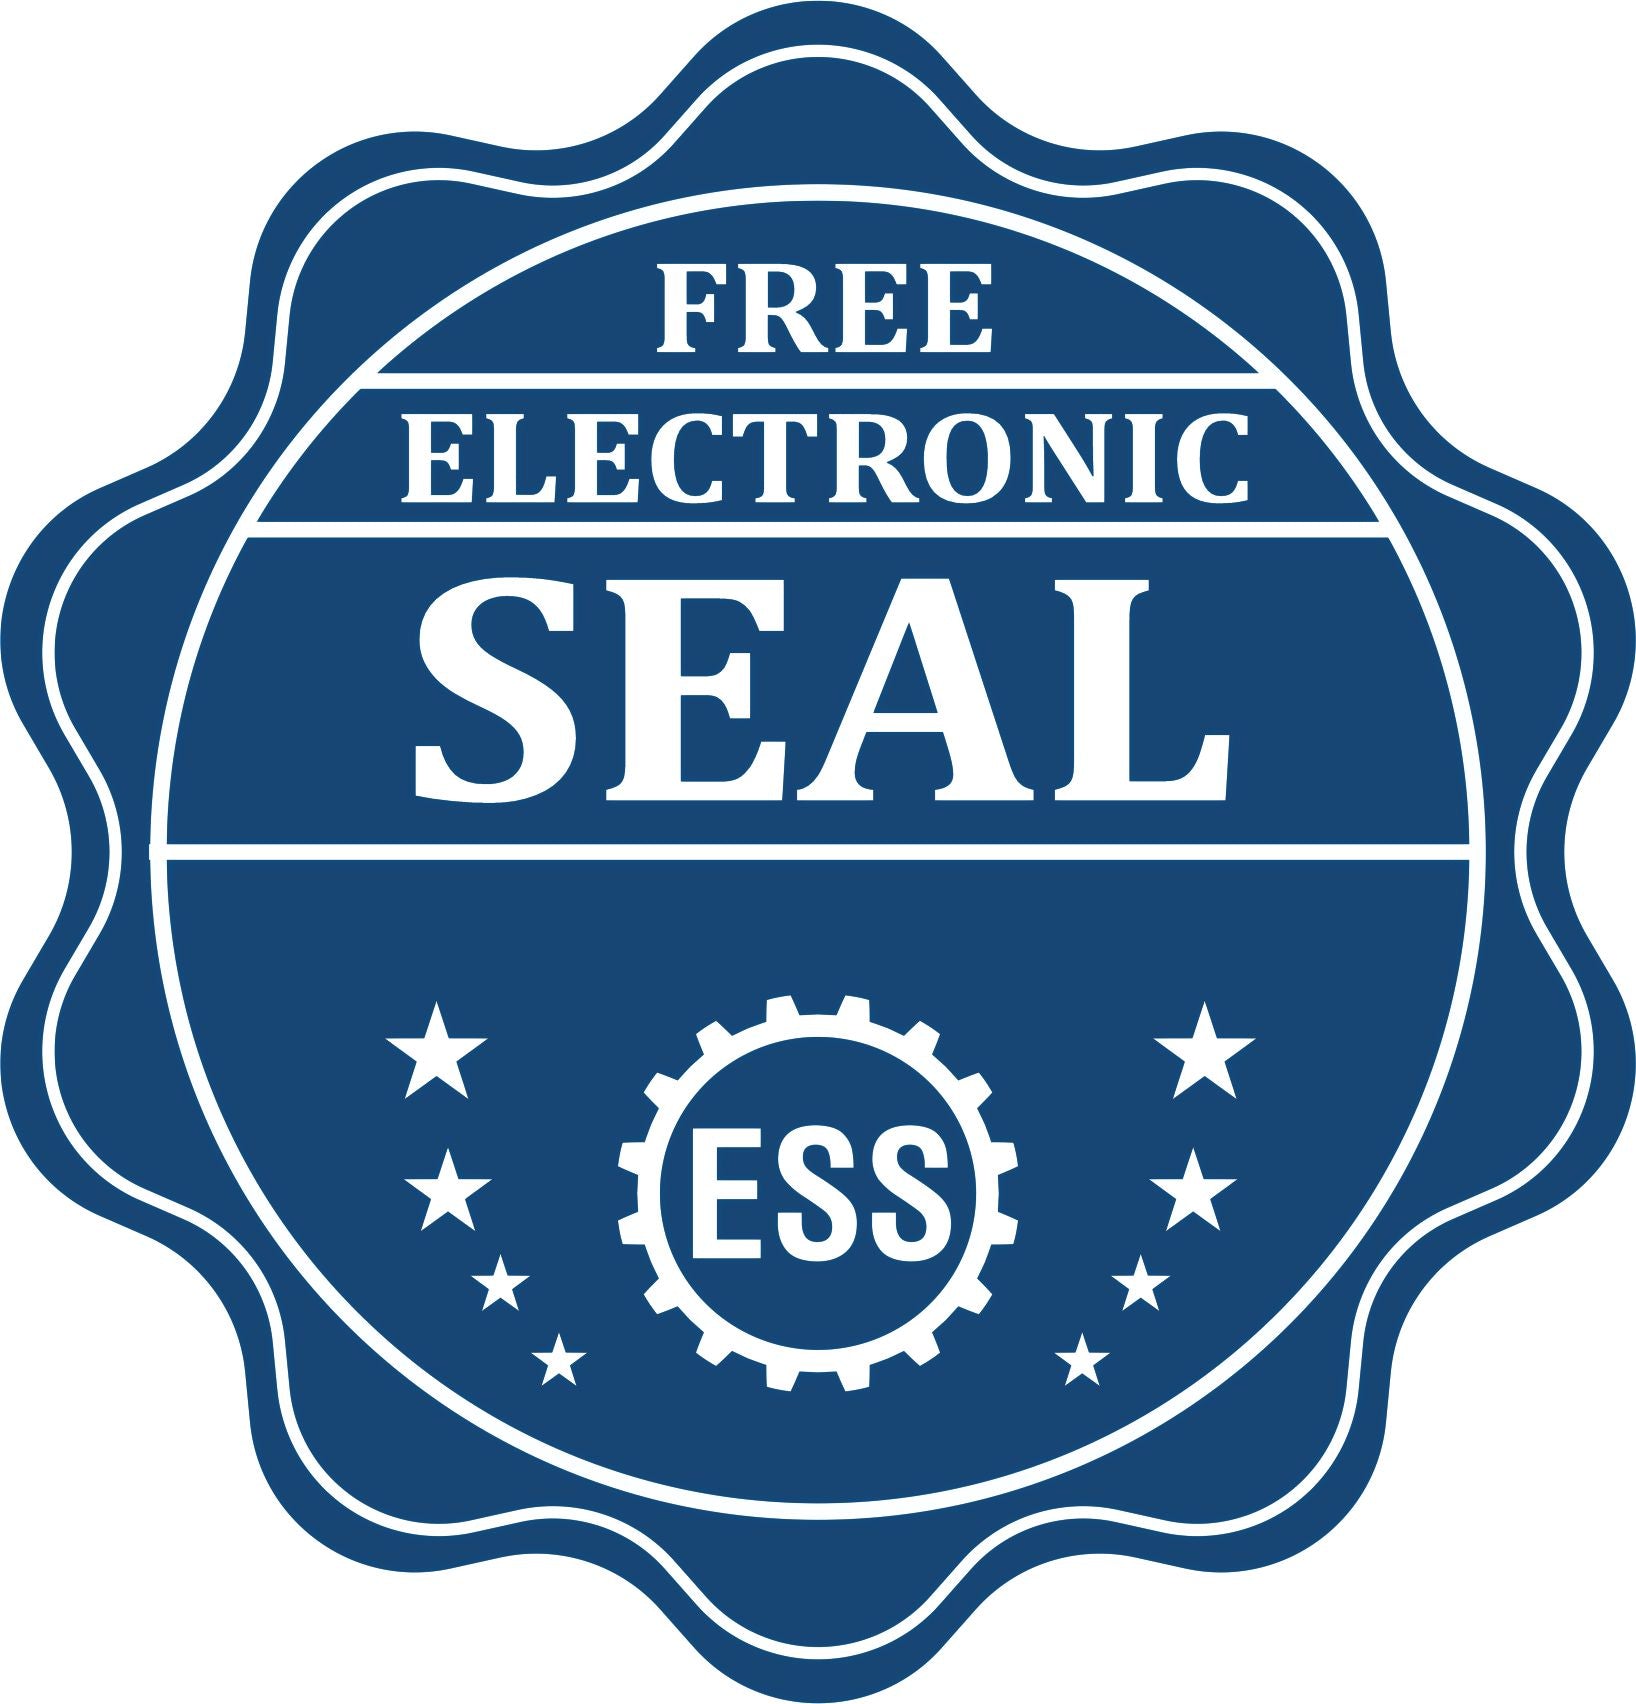 A badge showing a free electronic seal for the Gift Connecticut Architect Seal with stars and the ESS gear on the emblem.